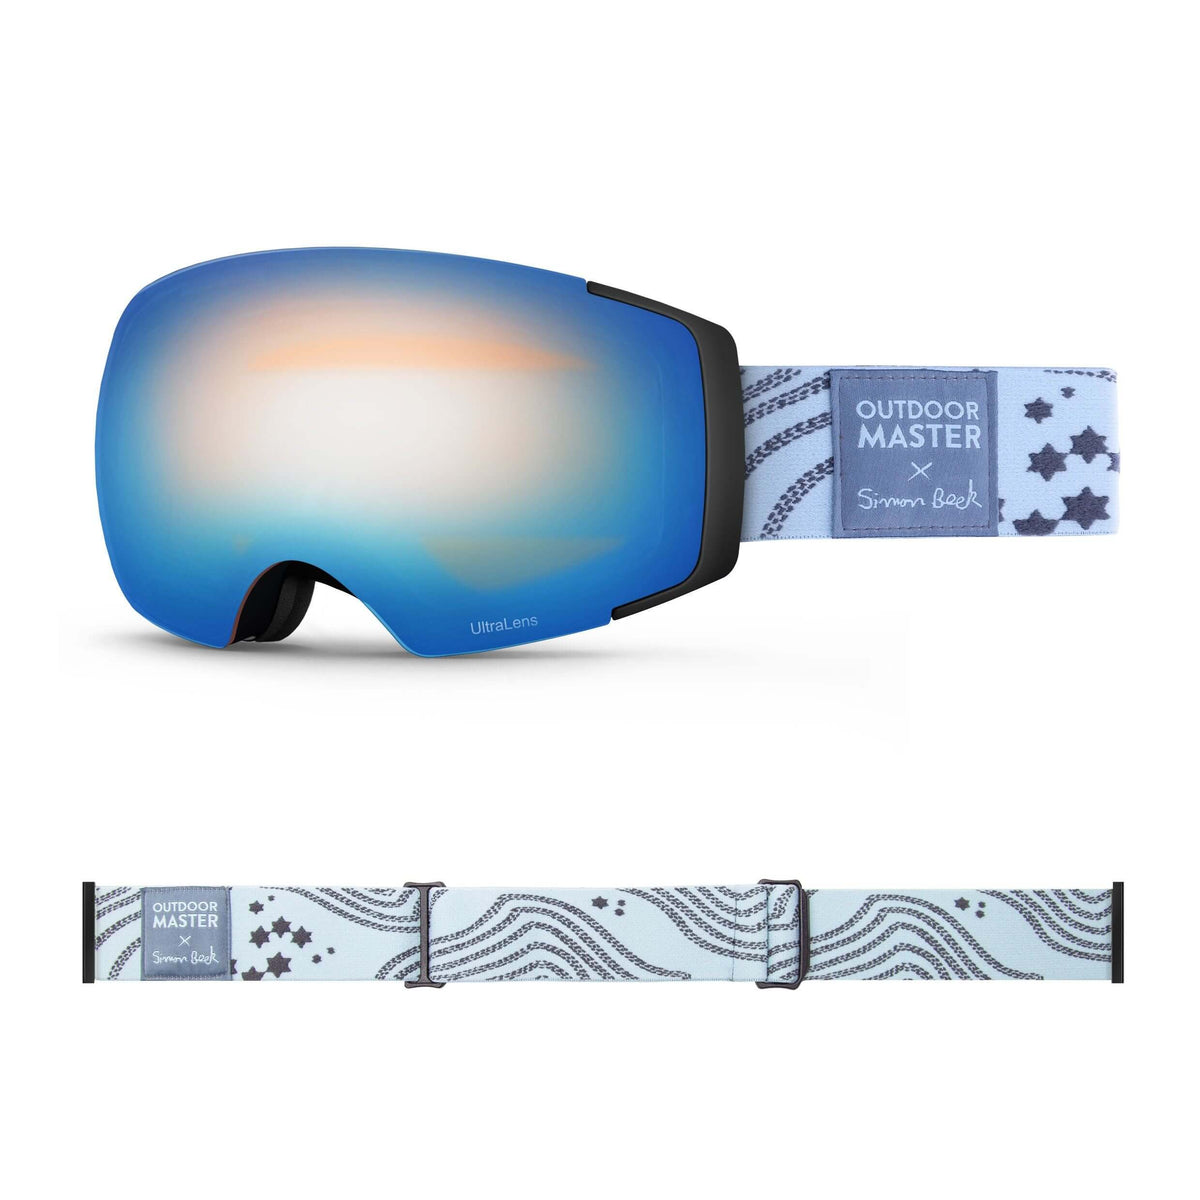 OutdoorMaster x Simon Beck Ski Goggles Pro Series - Snowshoeing Art Limited Edition OutdoorMaster UltraLens VLT 22% Optimized Orange with REVO Sapphire Star Road-Lightsteelblue